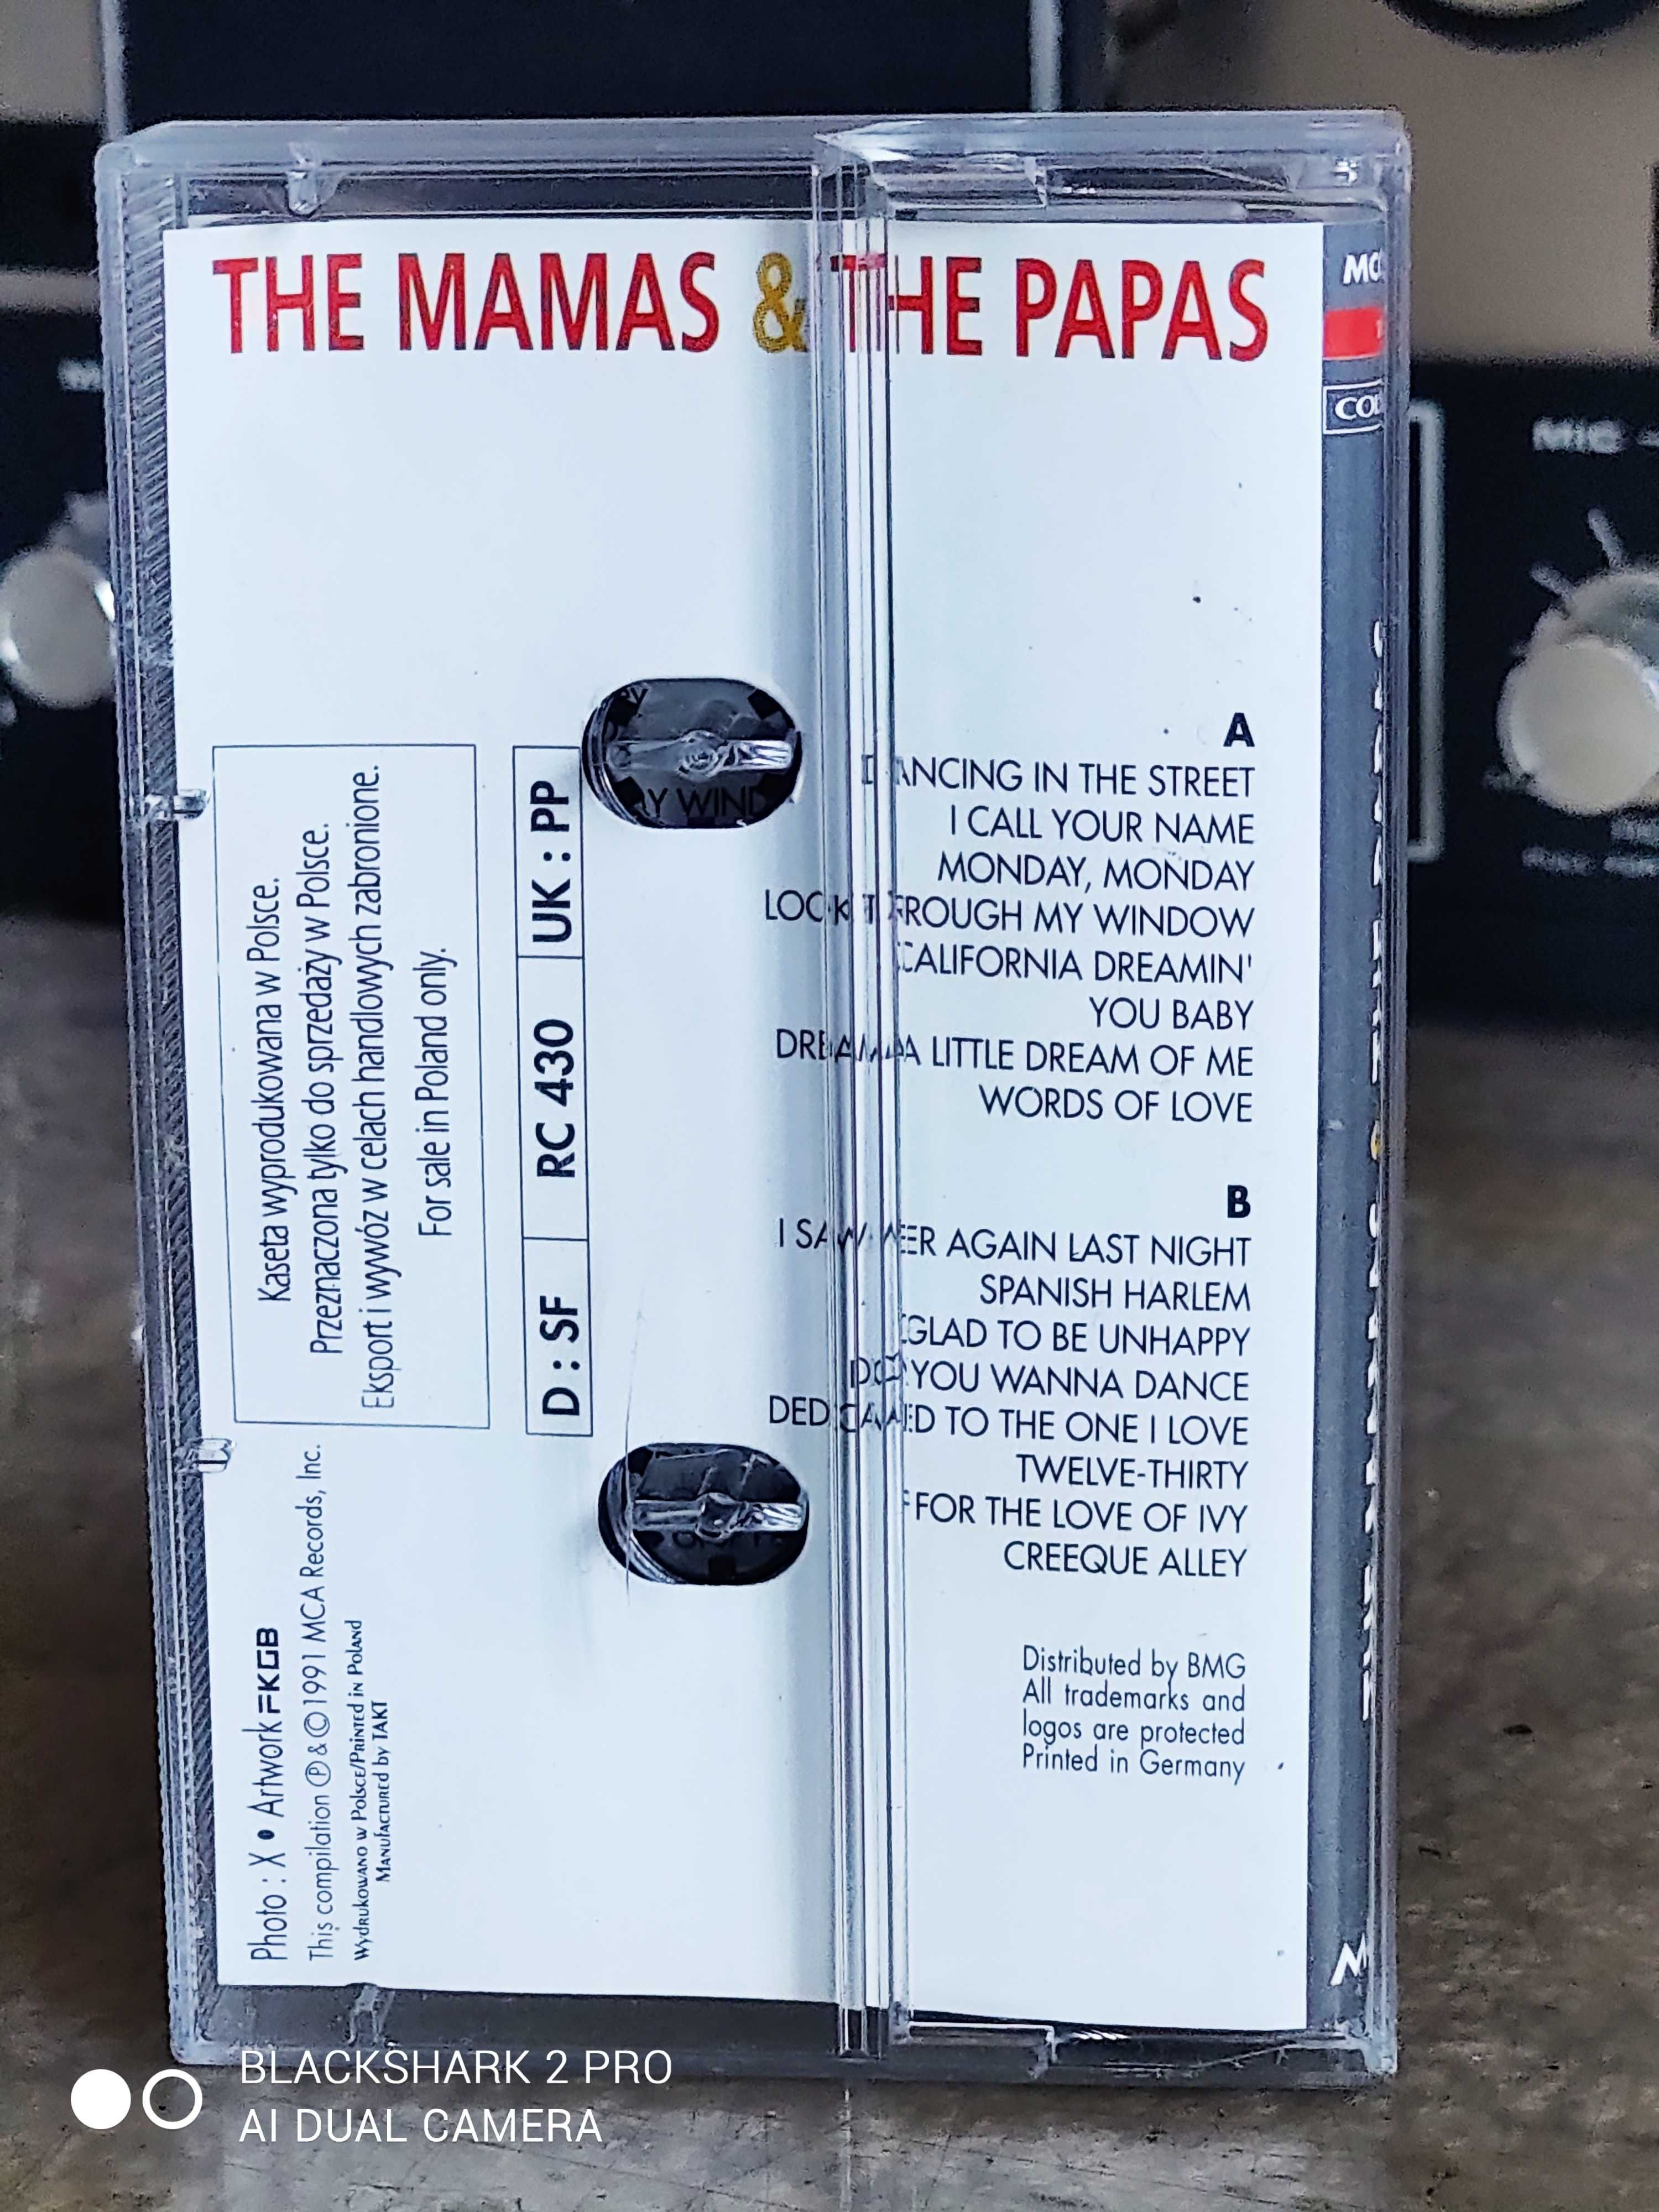 The Mamas & Papas " The Collection " na kasecie